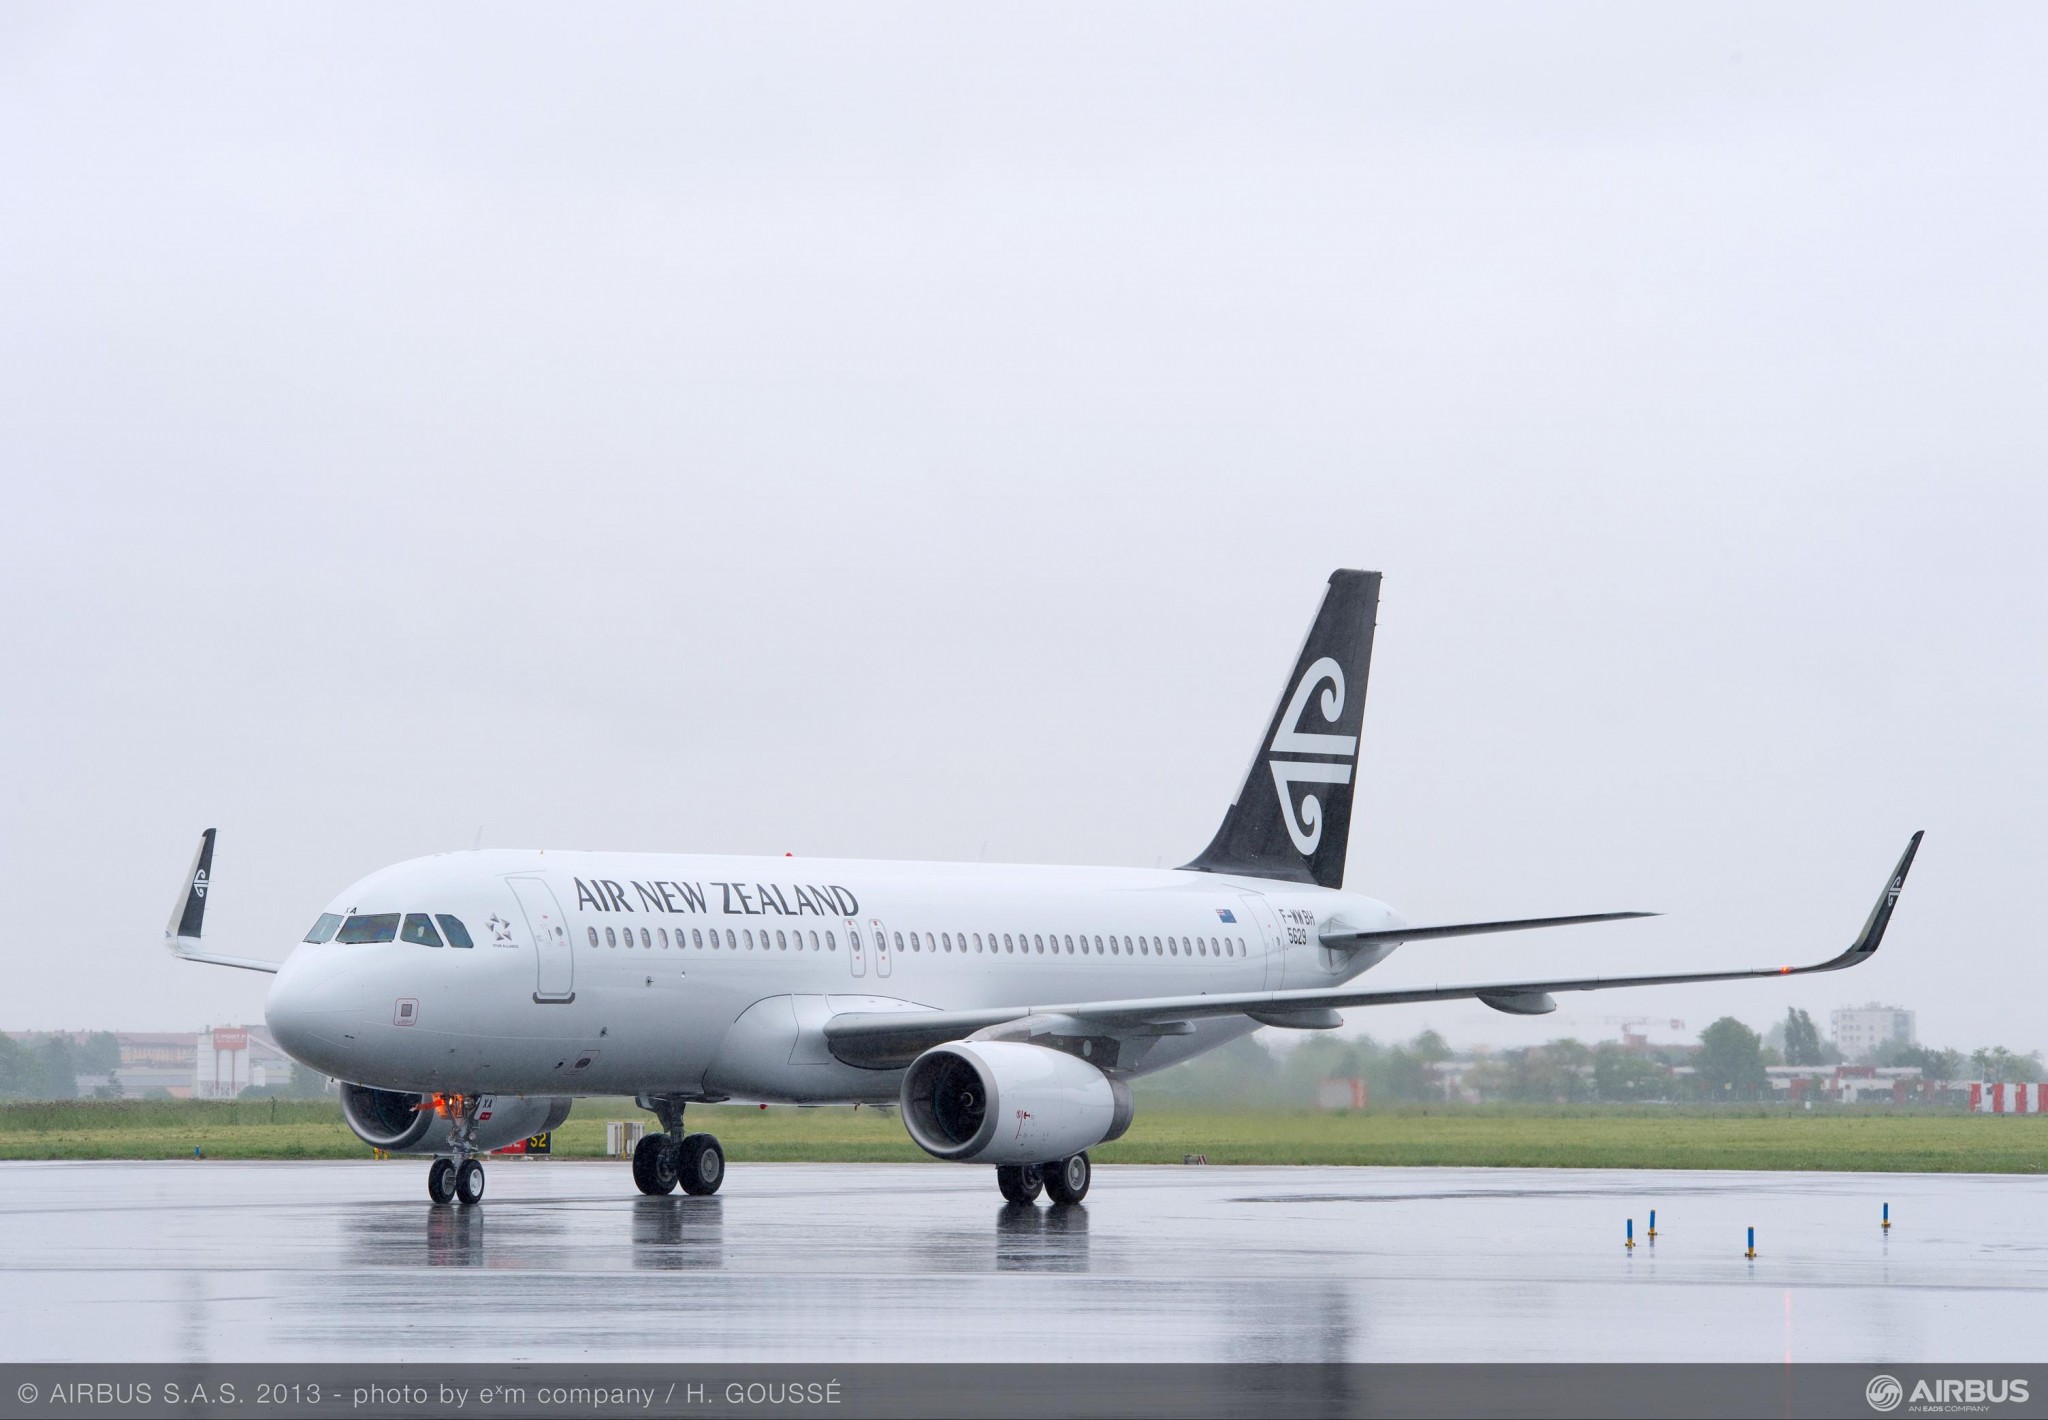 AAR to service Air New Zealand’s A320ceo and A320neo Fleets